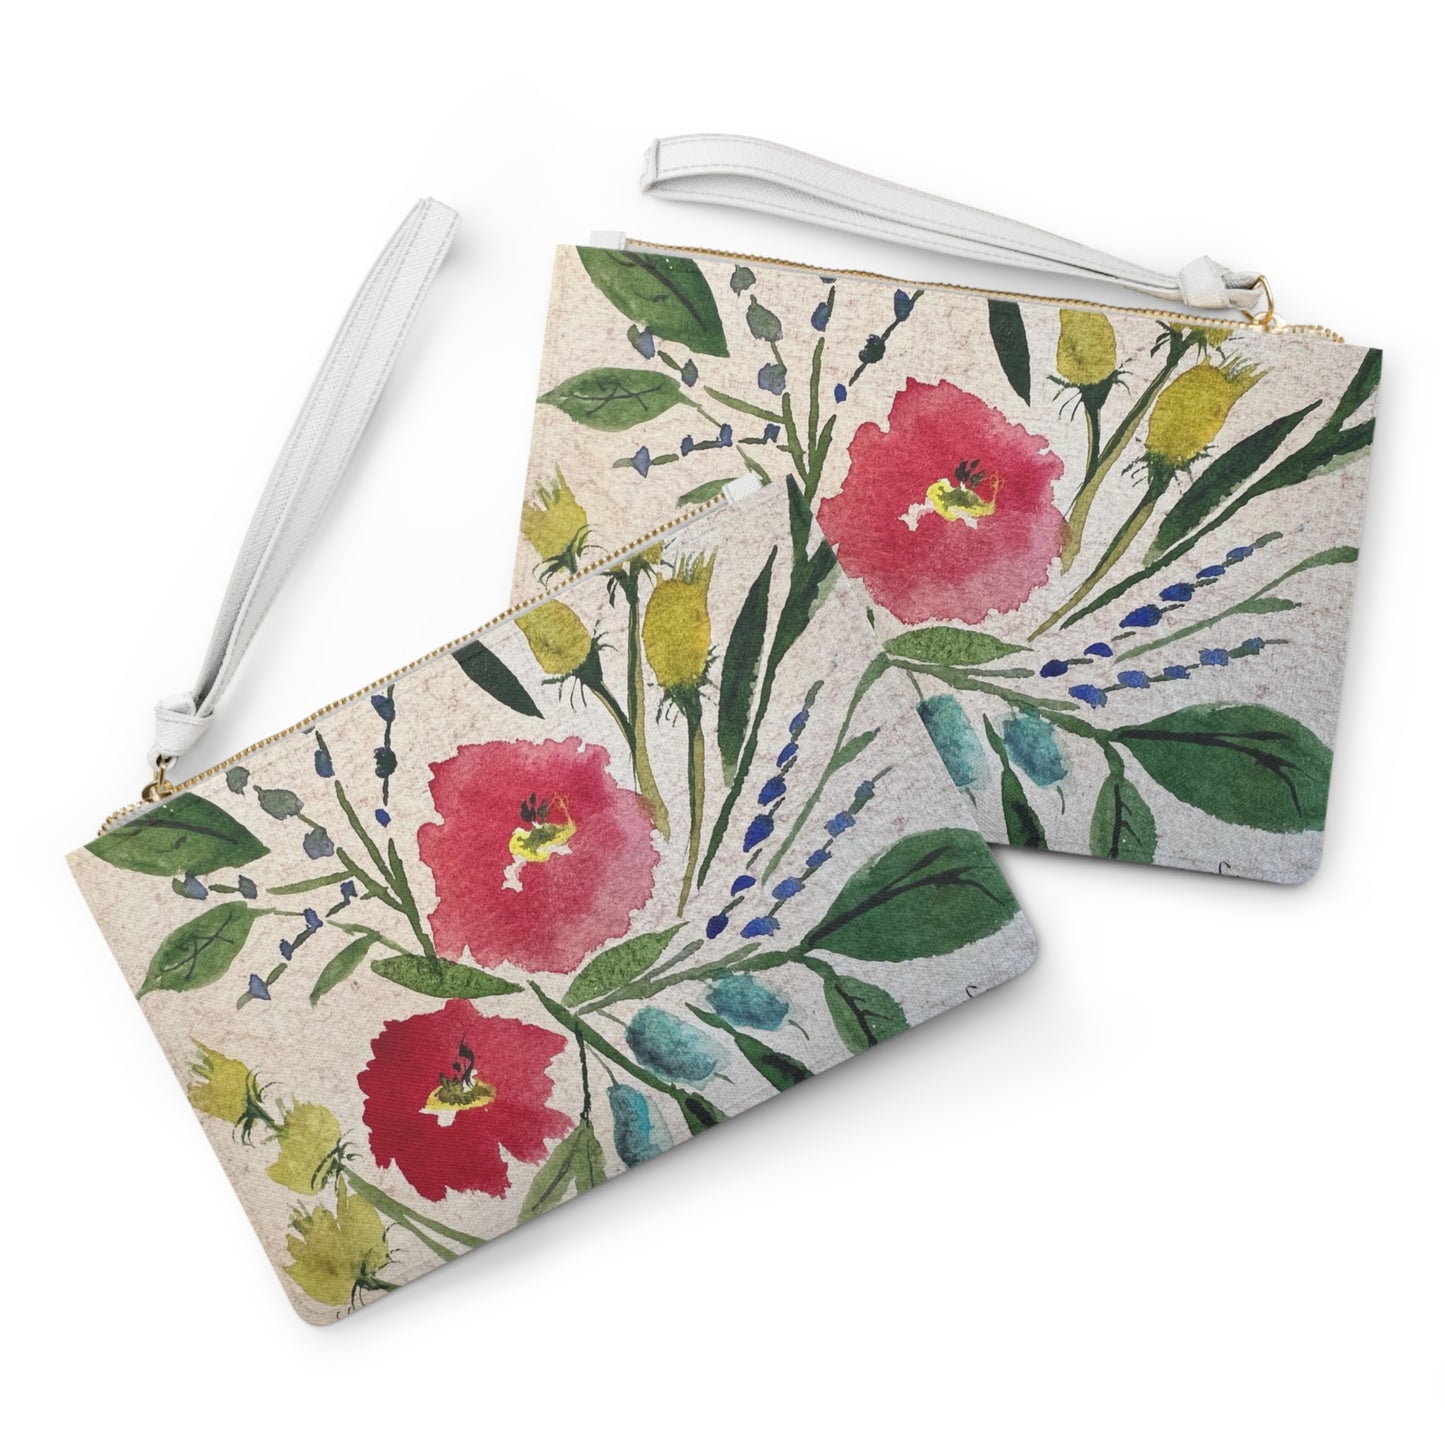 The Cottage Clutch Bag